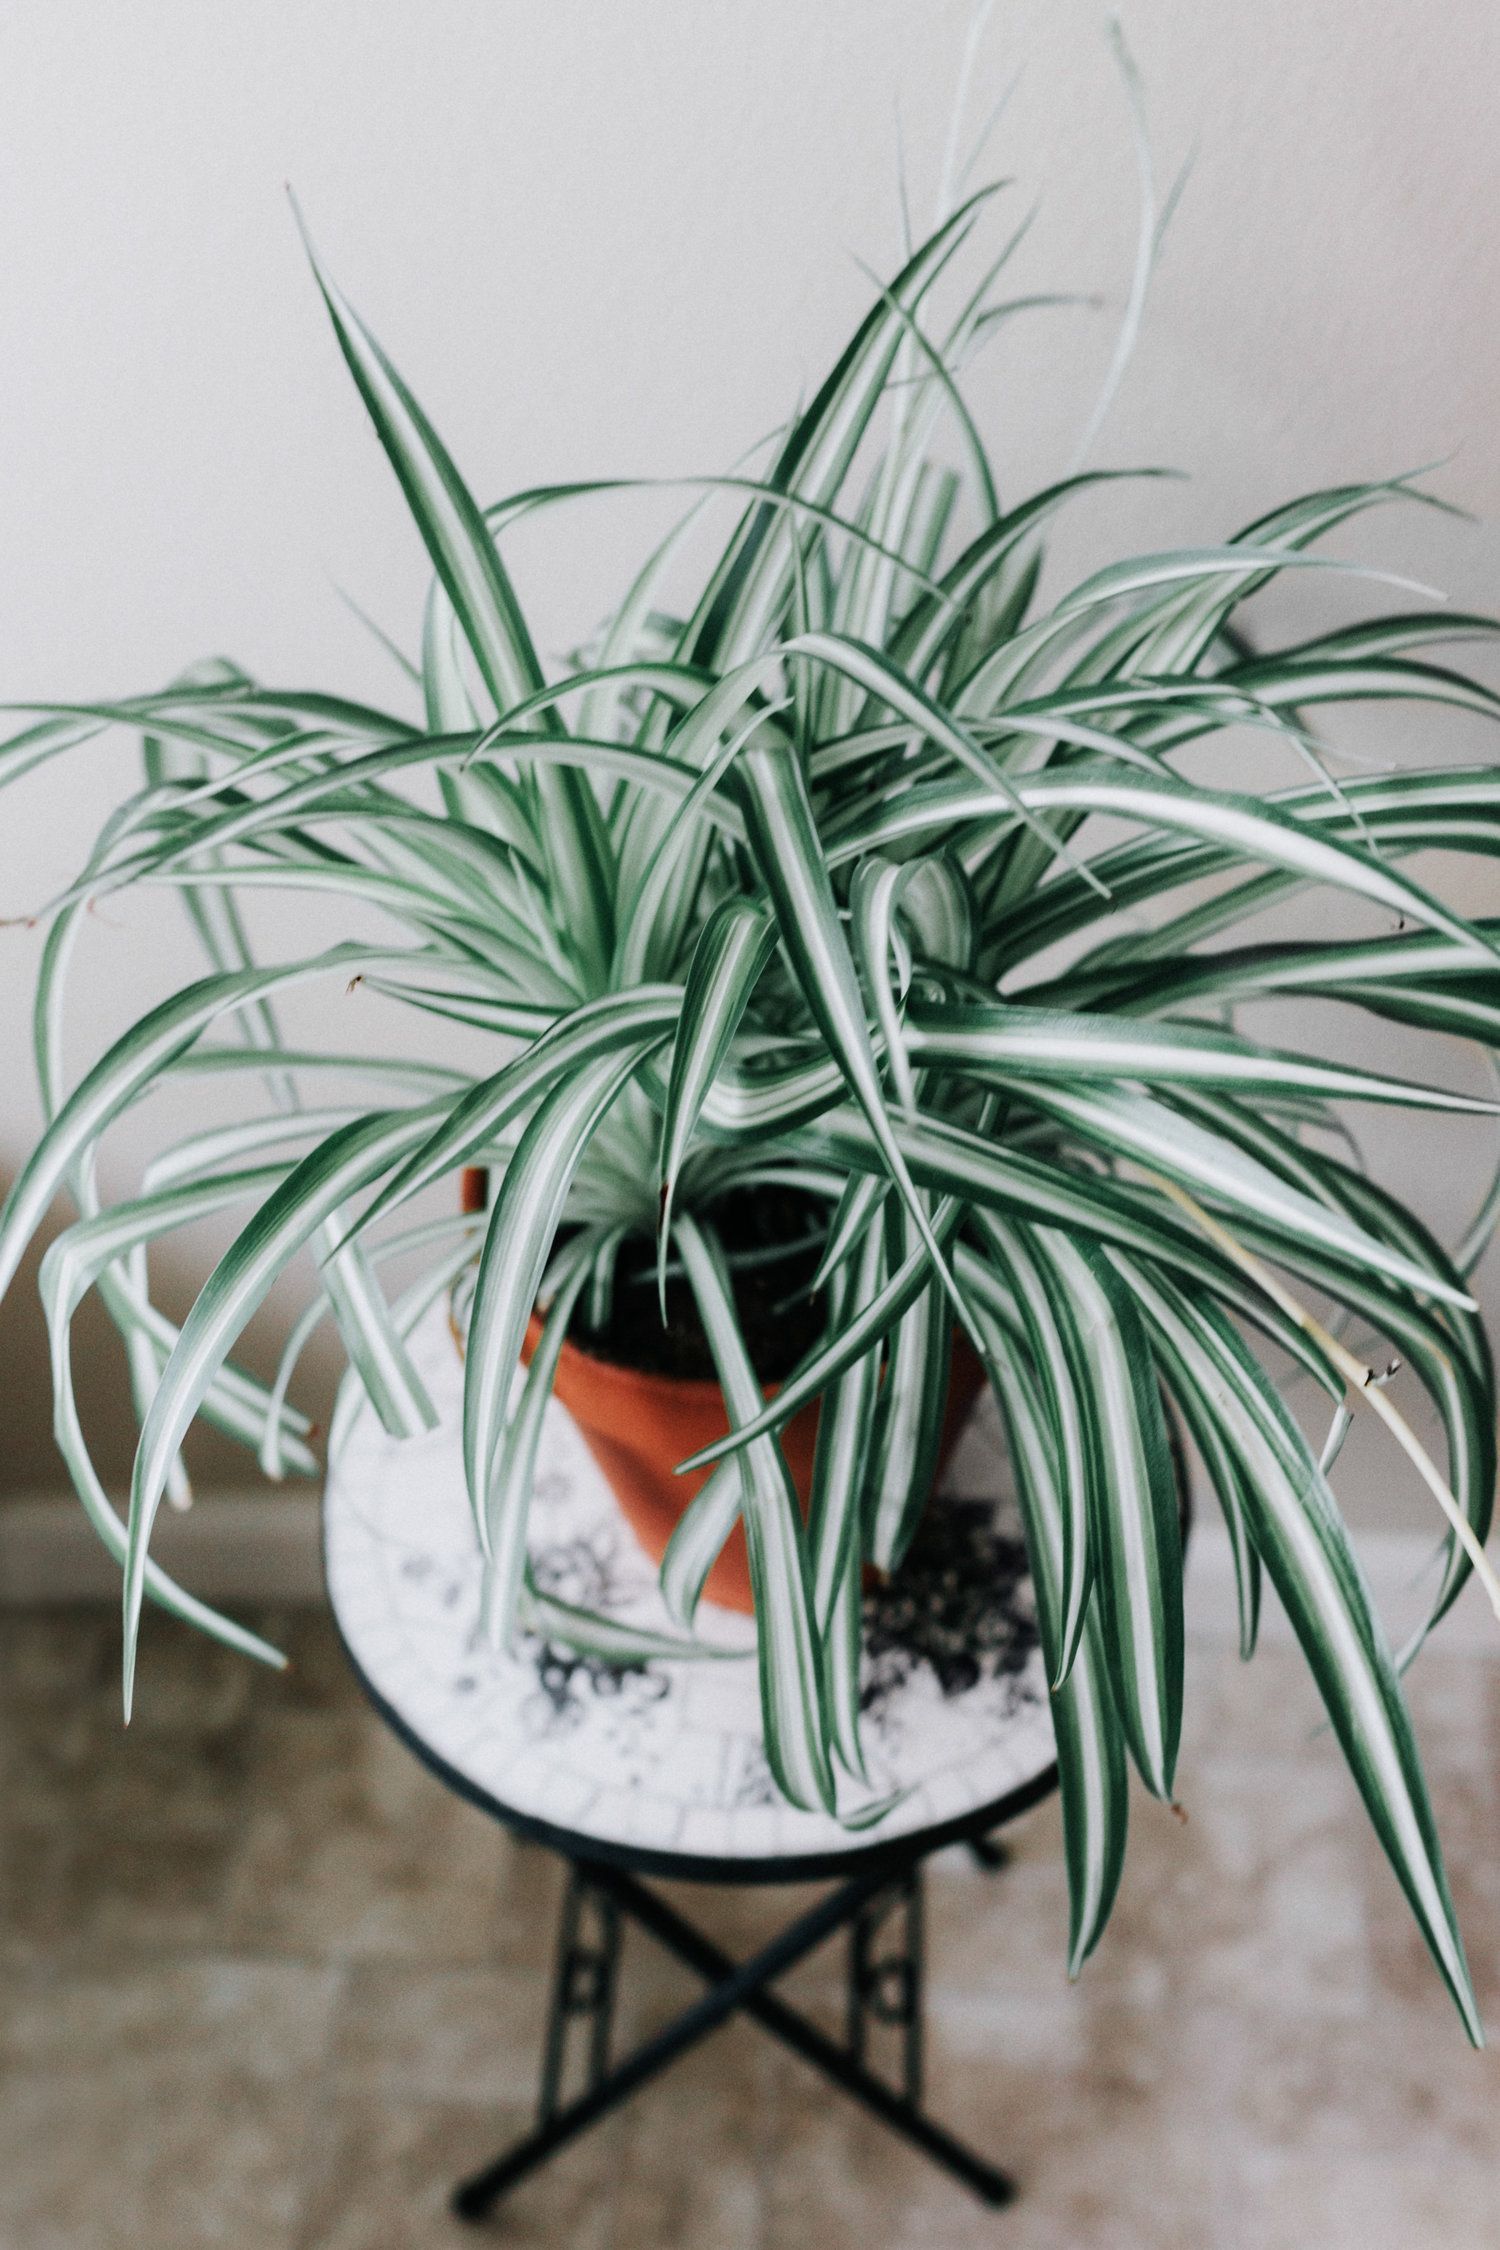 Spider Plant (Chlorophytum comosum) - Dusty Hegge | Host of Grow Well Podcast and Houseplant Course Creator -   16 spider plants Hanging ideas